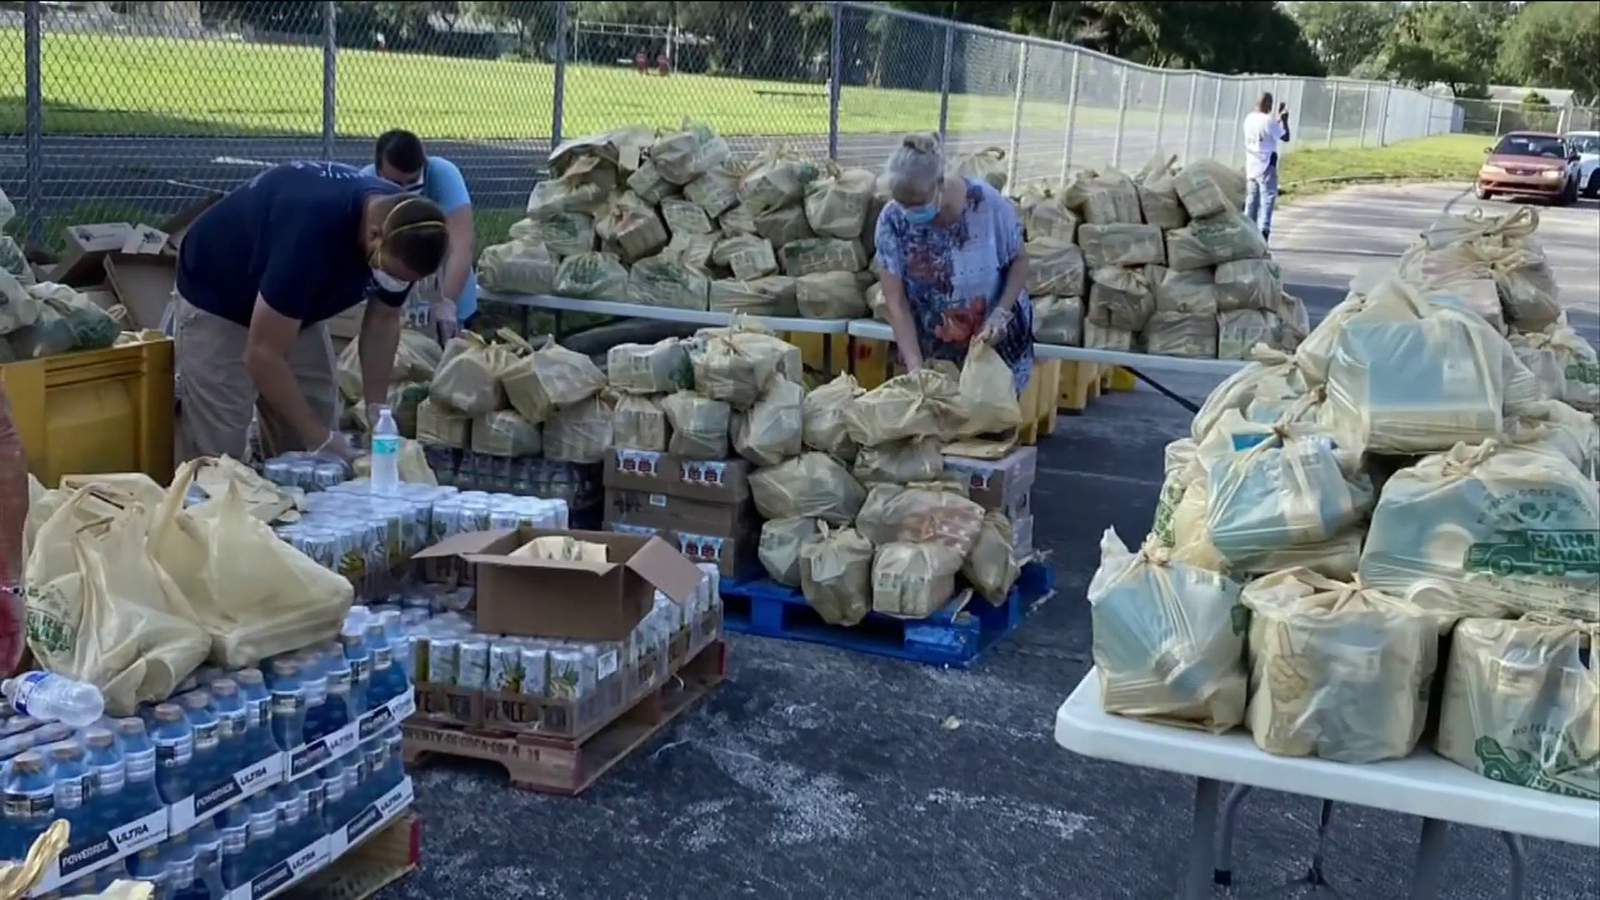 Food drive at Mayport Elementary helping families impacted by COVID-19